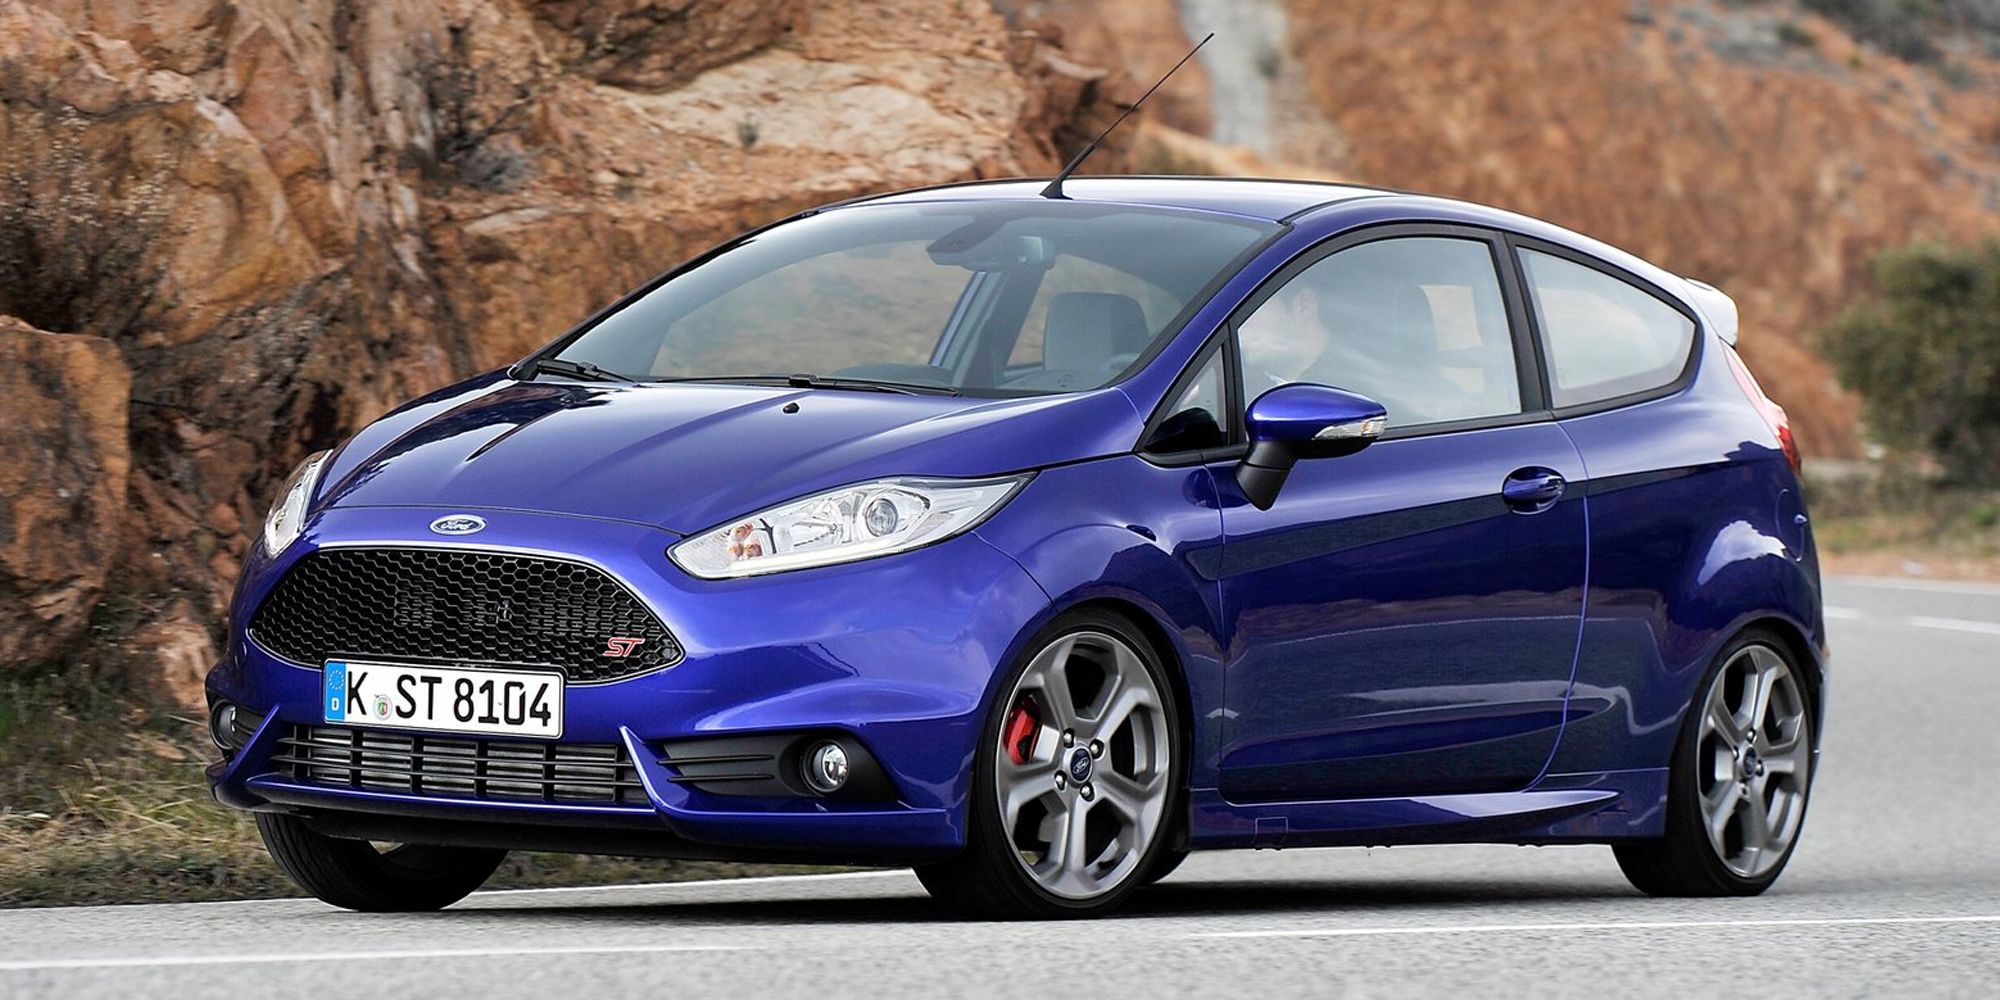 Front 3/4 view of a blue Fiesta ST on the move